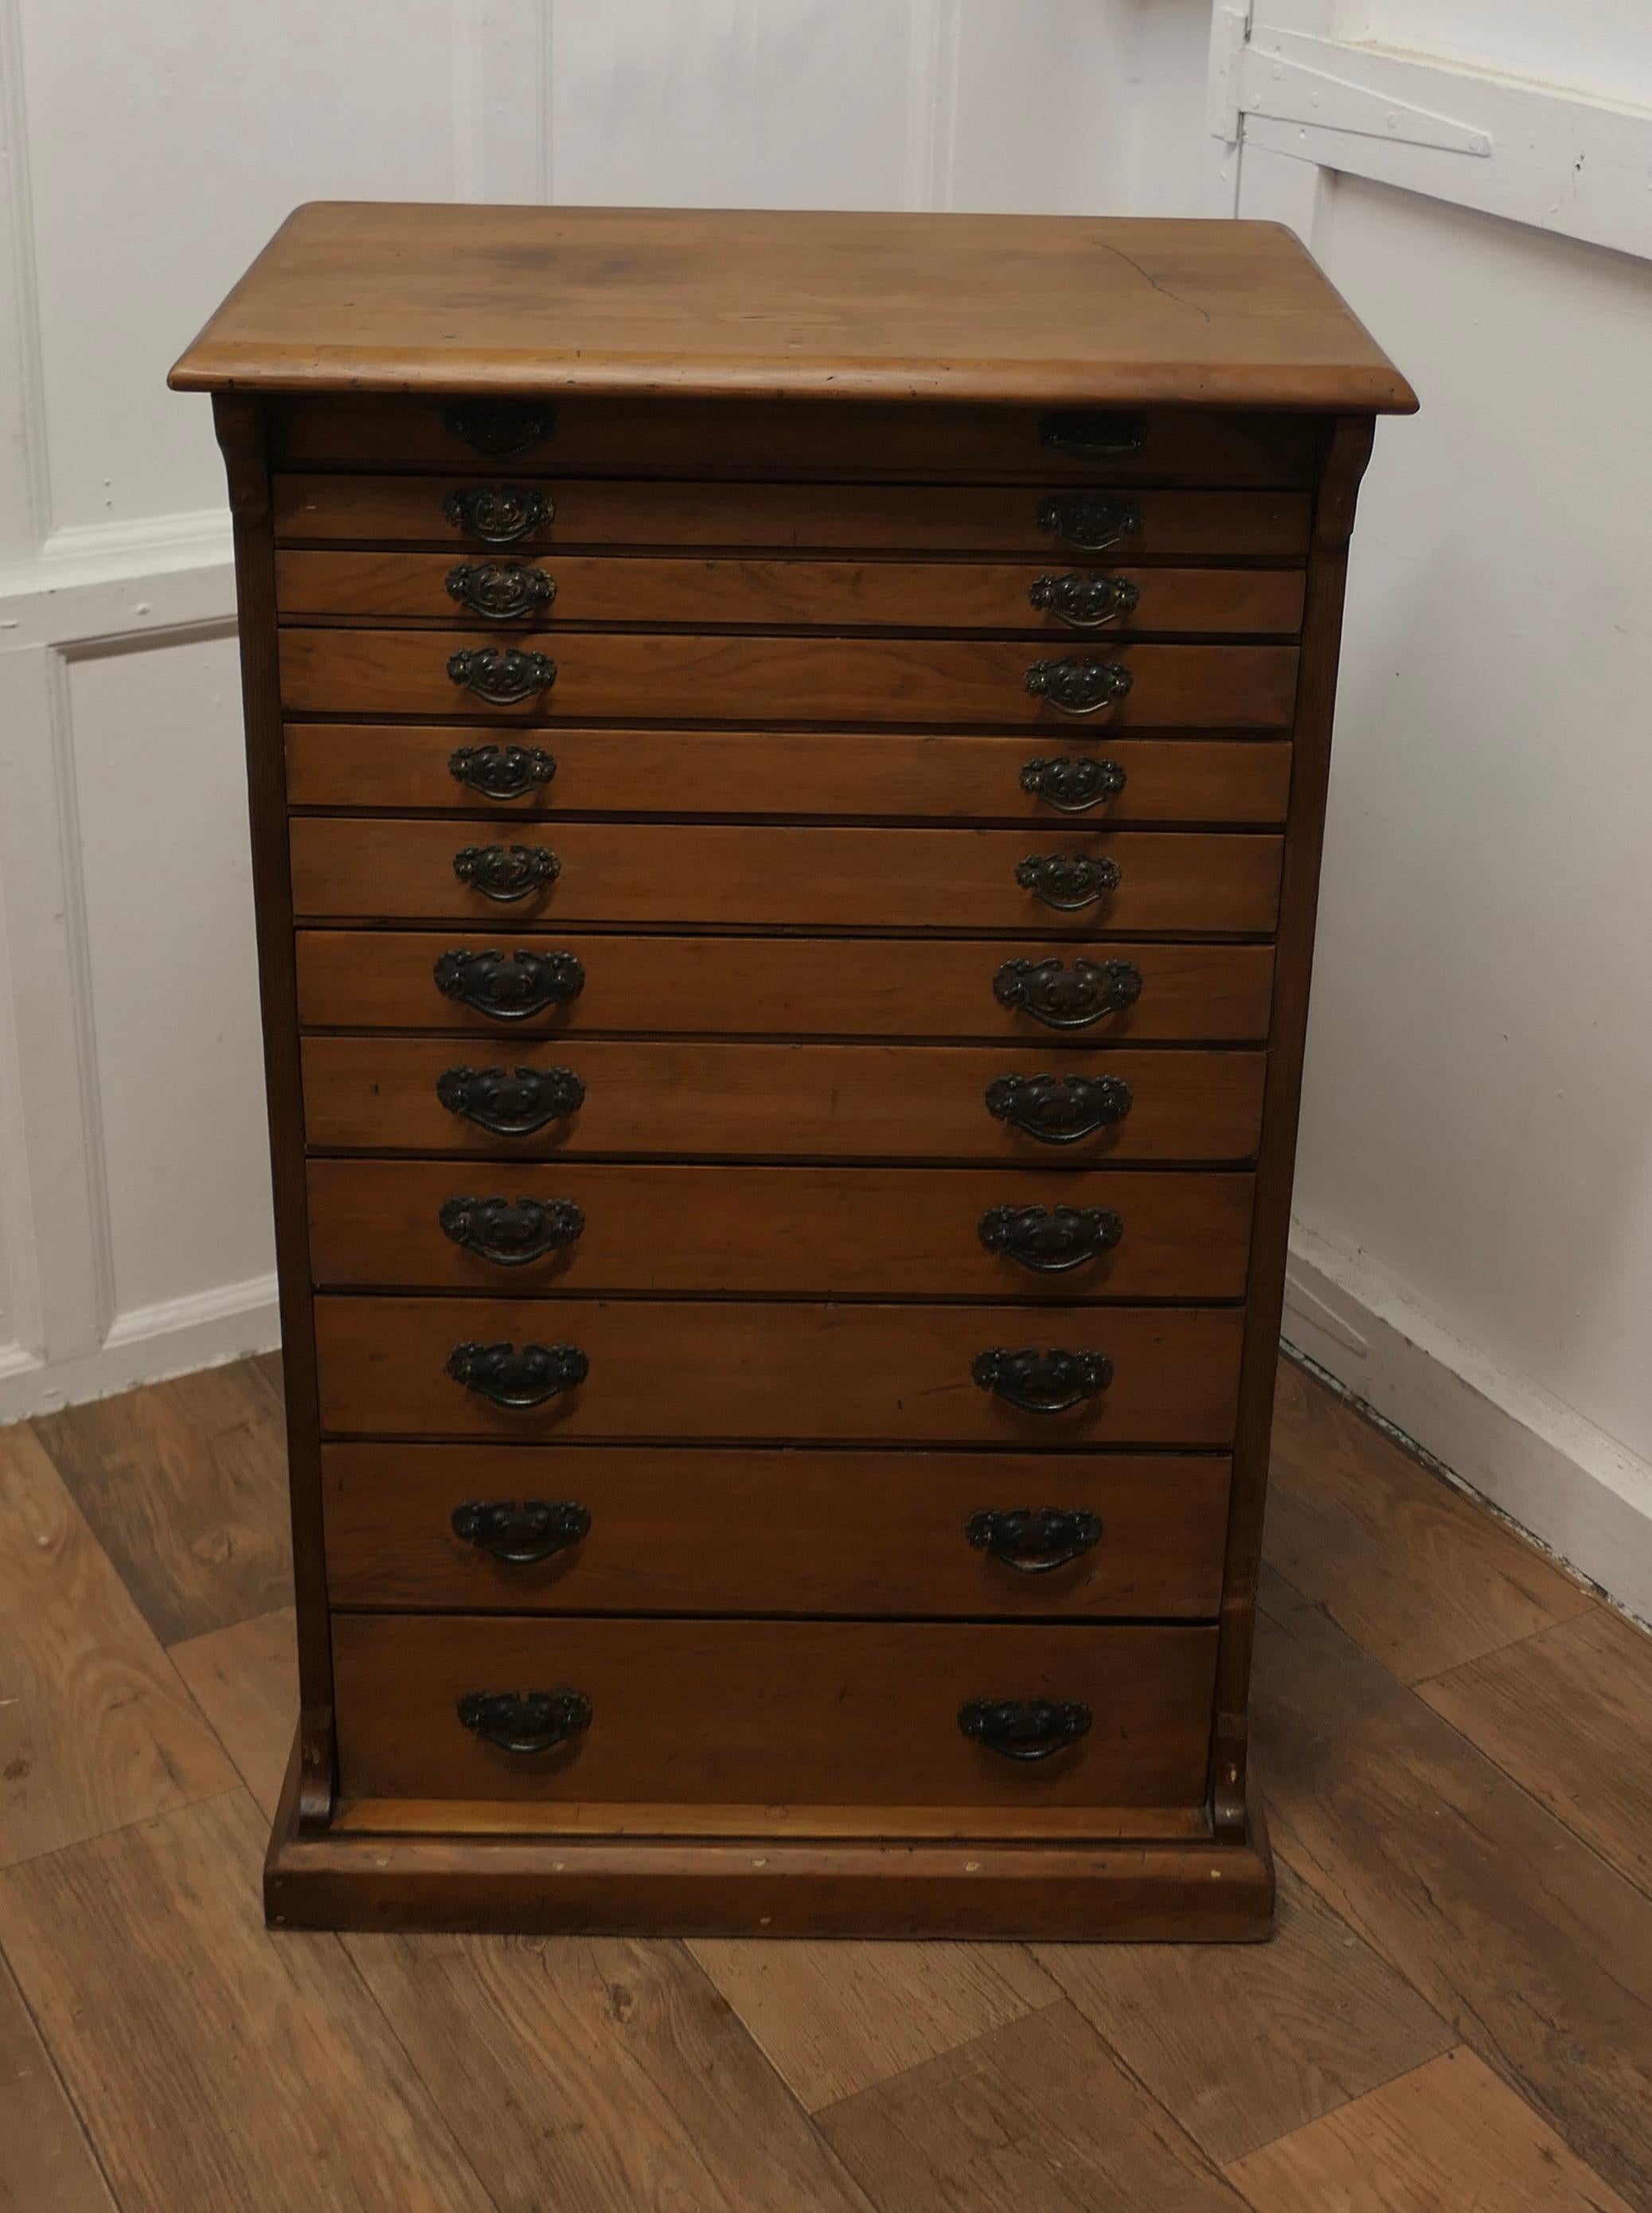 Arts and Crafts Pine Collectors Cabinet Filing Drawers

The Cabinet is made in natural pine and has 12 Long Drawers, some of the drawers have the original dividers others are missing, if you require to remove them all this is simple as they are not